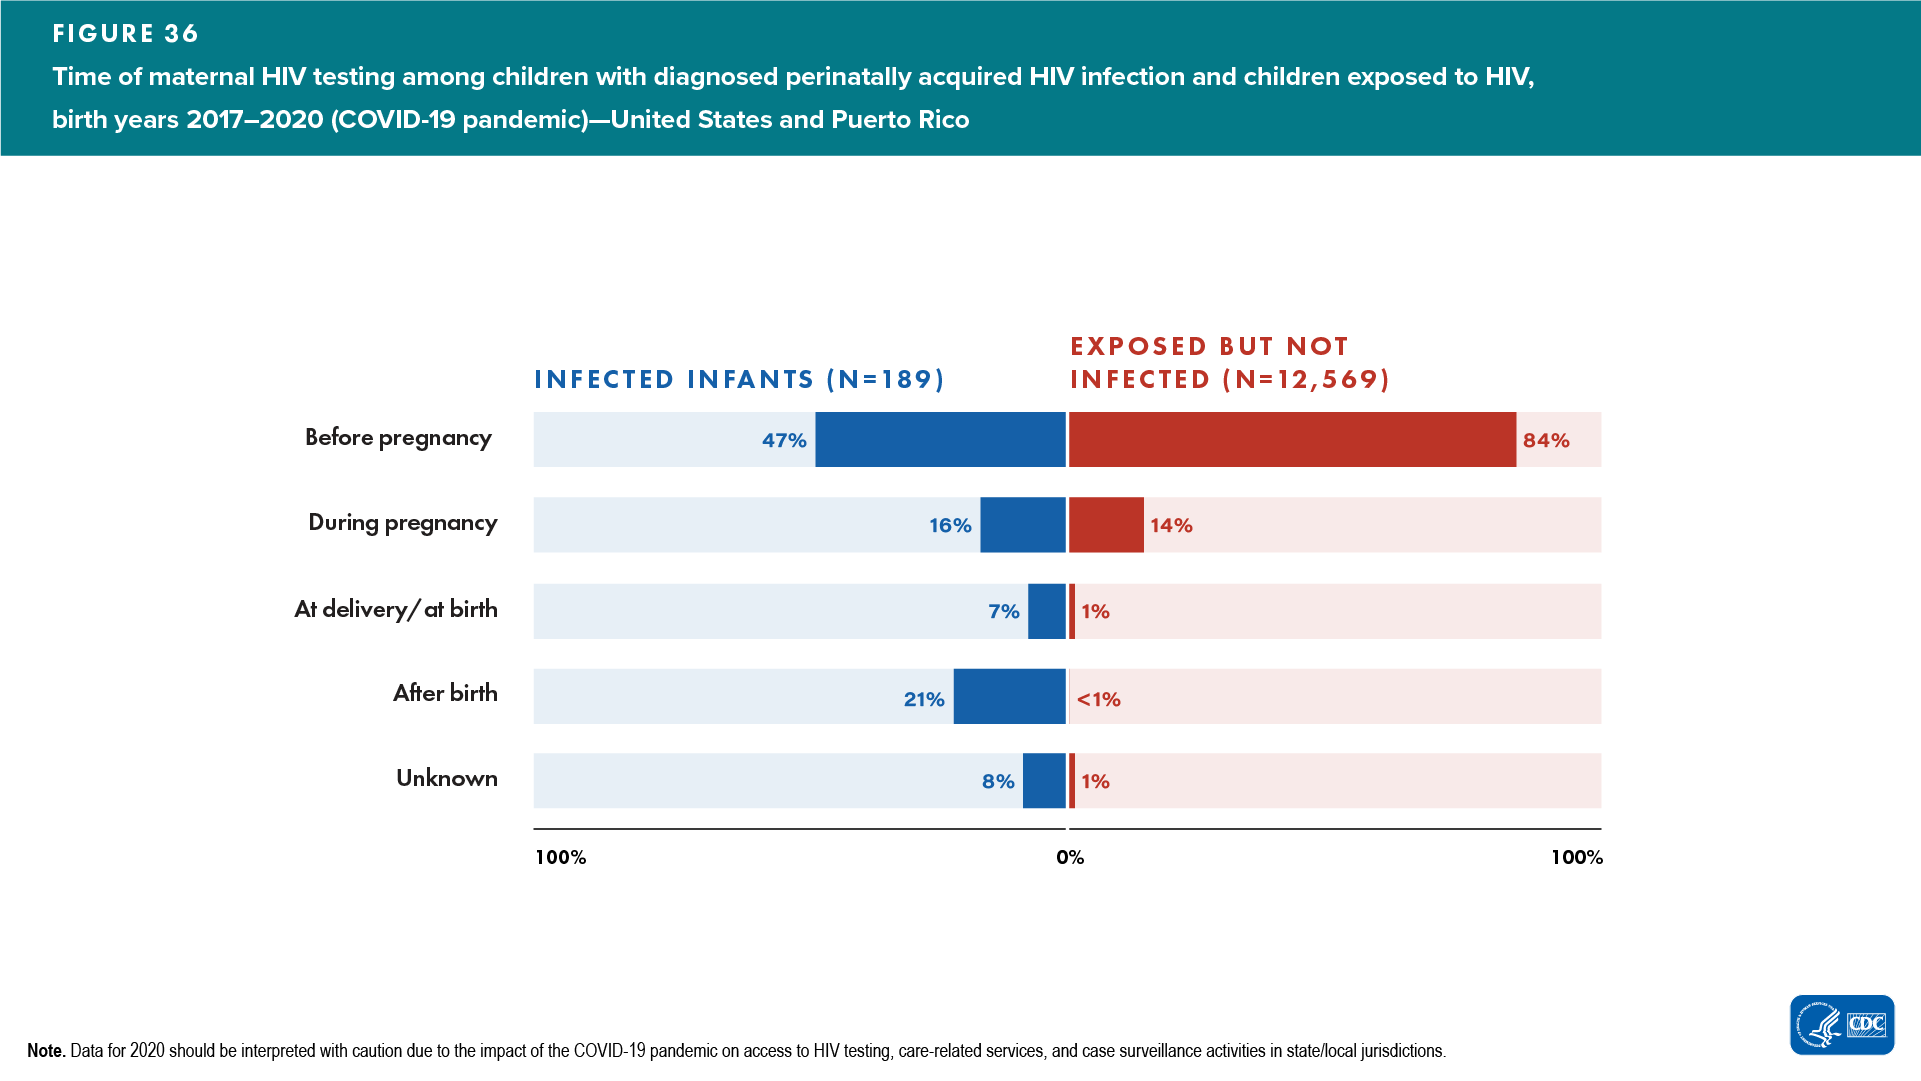 In 2021, compared to 2017, in the United States and Puerto Rico, among the 189 children born with diagnosed, perinatally acquired HIV infection, 47% were born to mothers who were tested before pregnancy. Among the 12,569 children born who were exposed to but not perinatally infected with HIV, 84% were born to mothers who were tested before pregnancy.